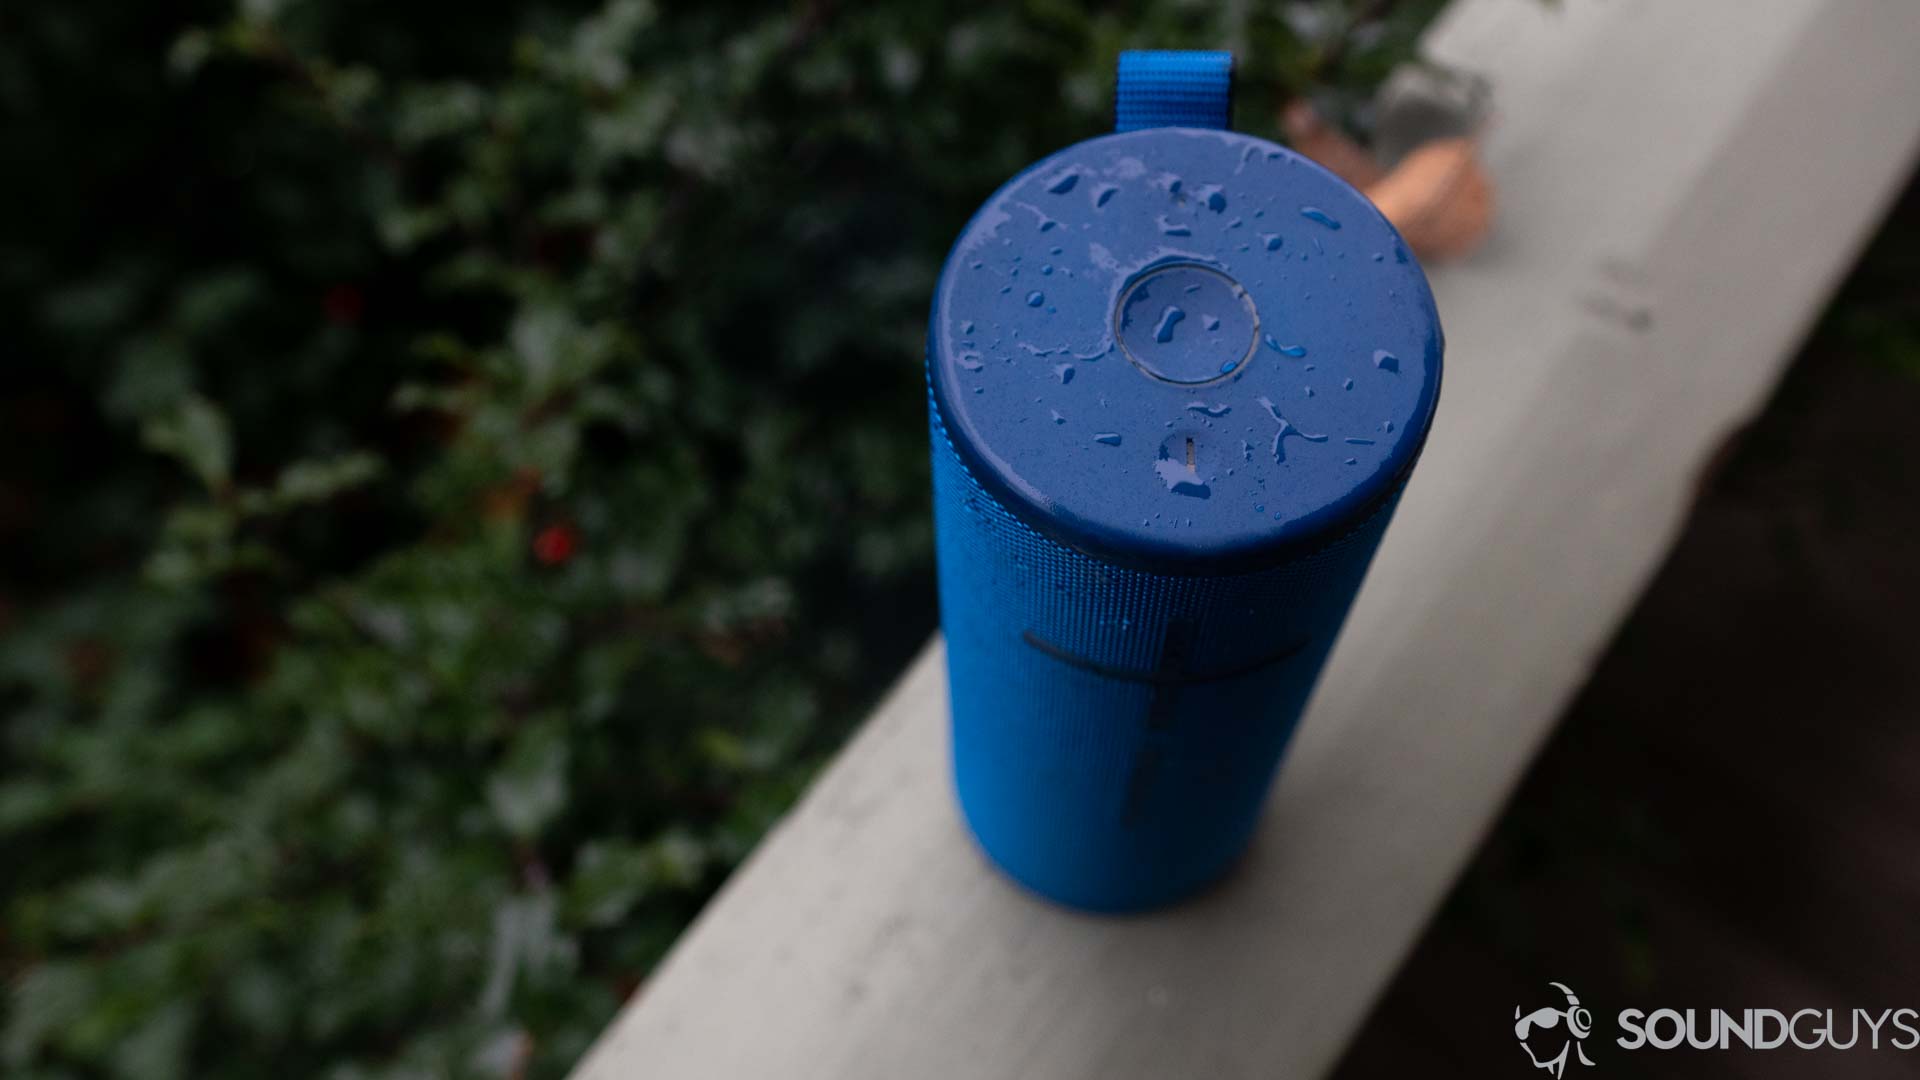 The top of the UE Boom 3 in blue showing its buttons and water splashes.